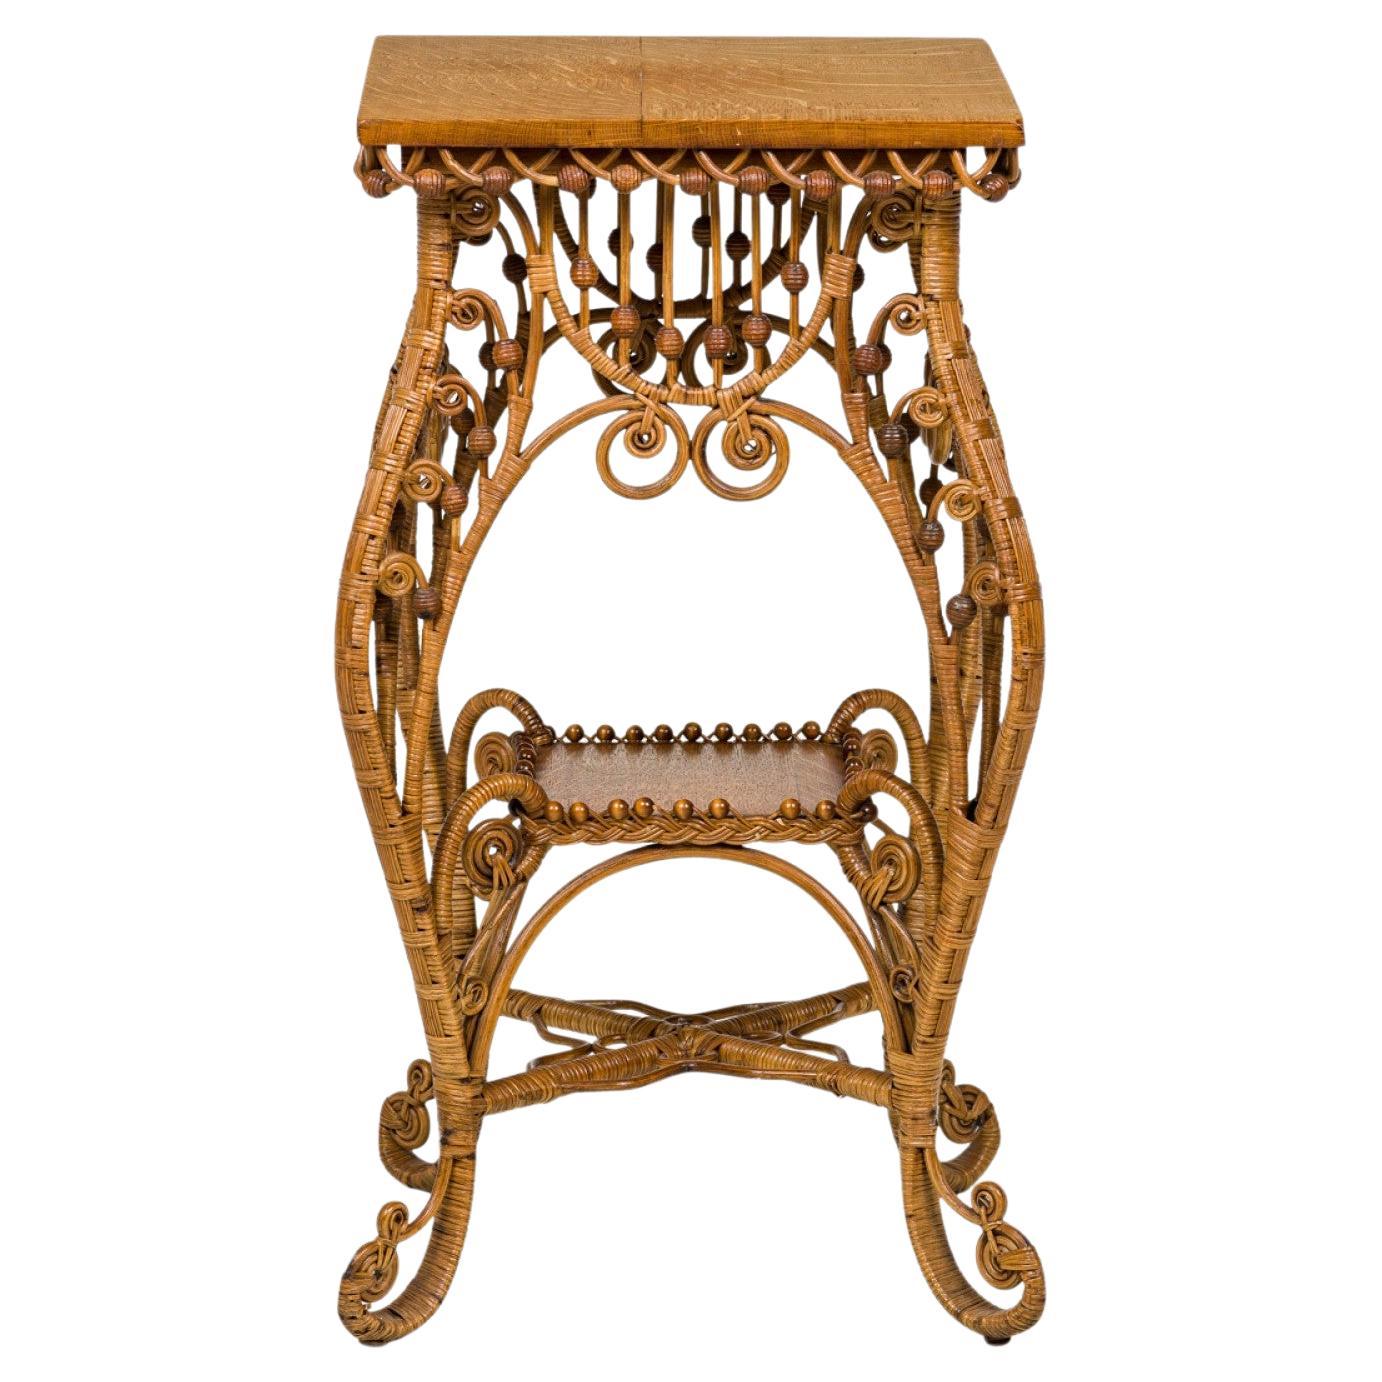 American Victorian Wicker and oak topped square side table with splayed, wicker-wrapped scroll legs, openwork decorative apron, X-stretcher base and beaded stretcher shelf.(att: HEYWOOD WAKEFIELD).